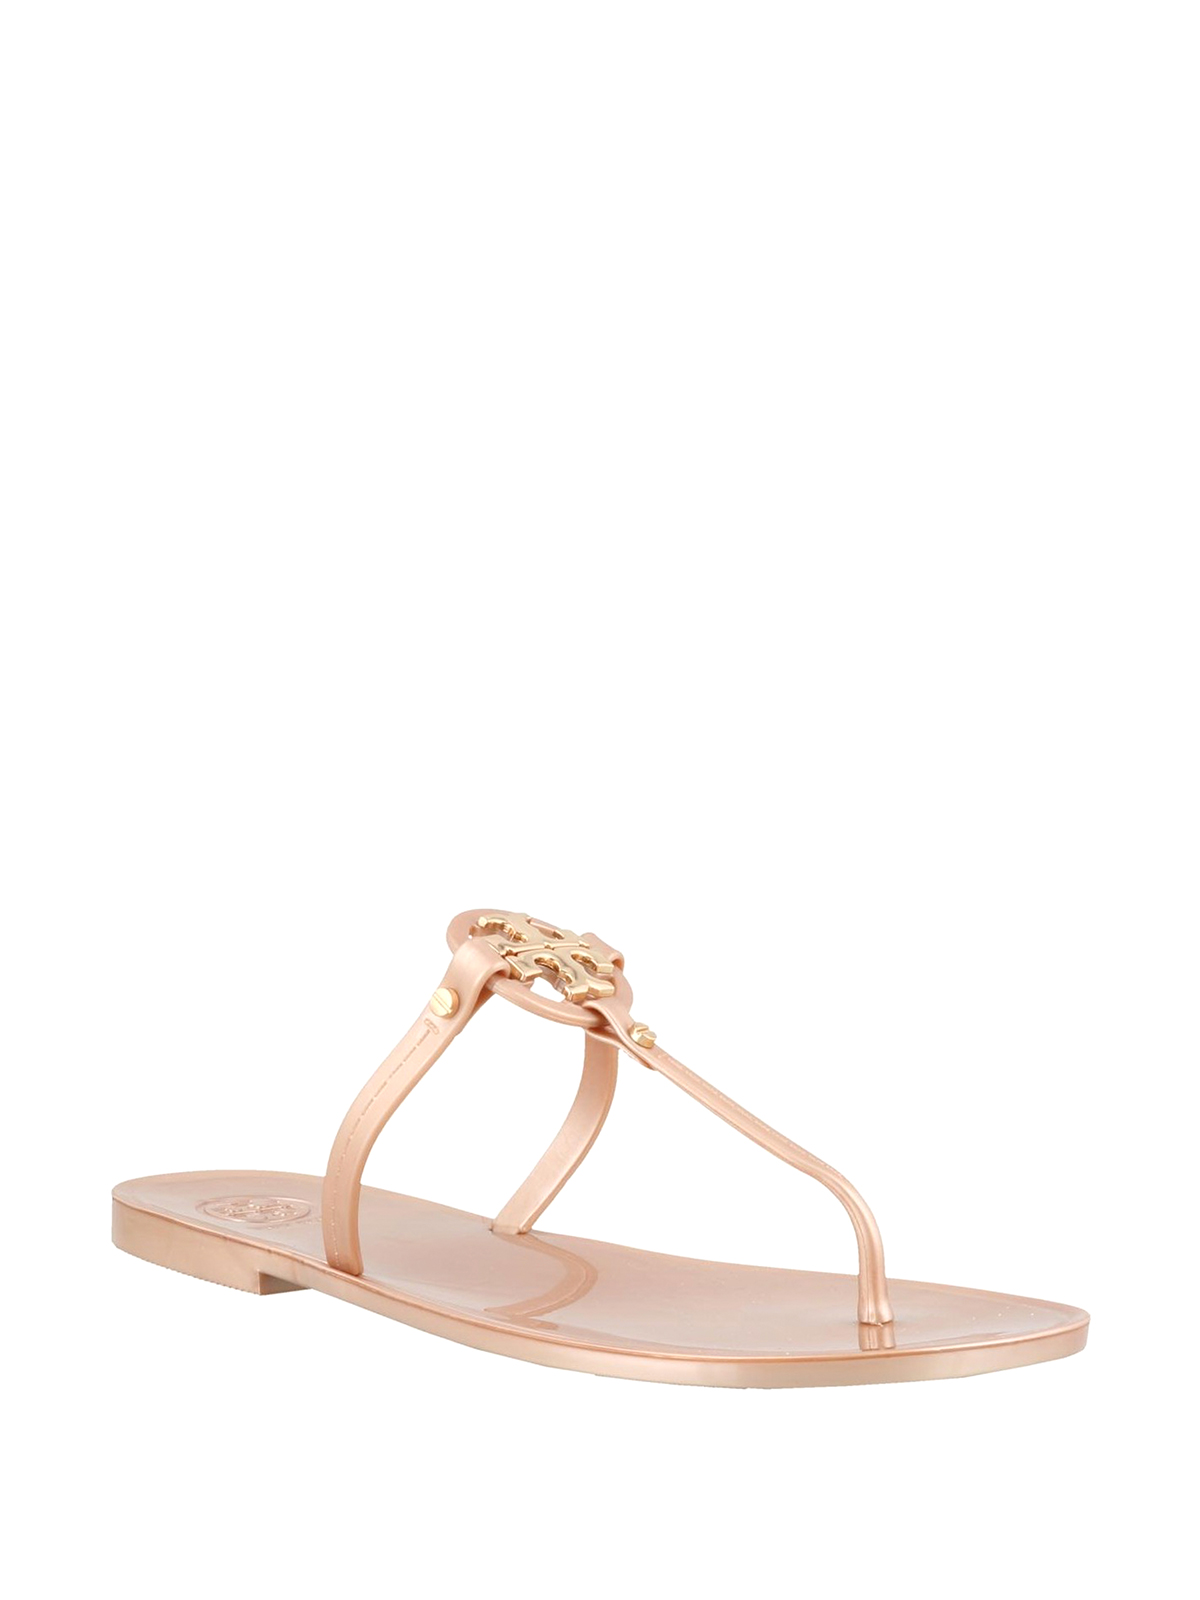 tory burch white jelly sandals